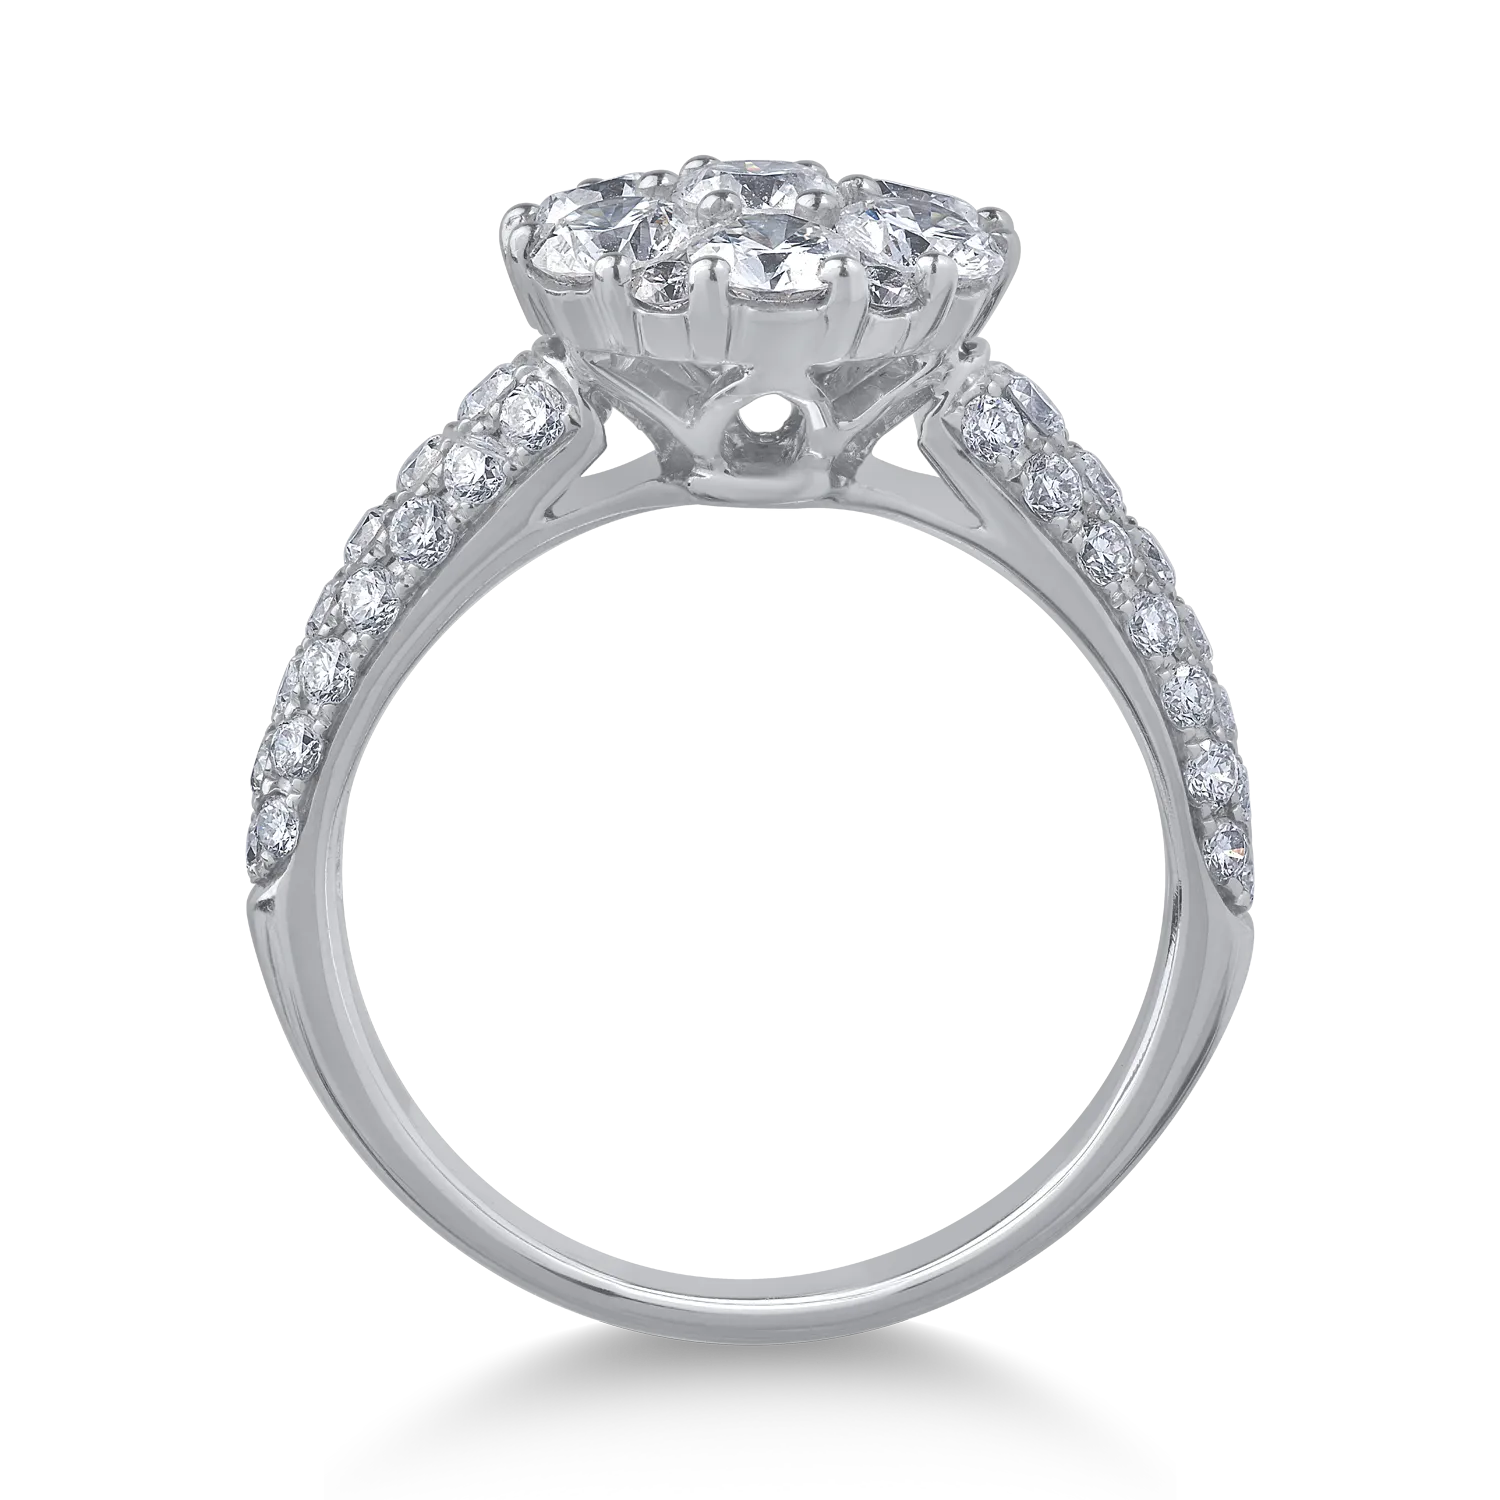 18K white gold ring with 1.86ct diamonds